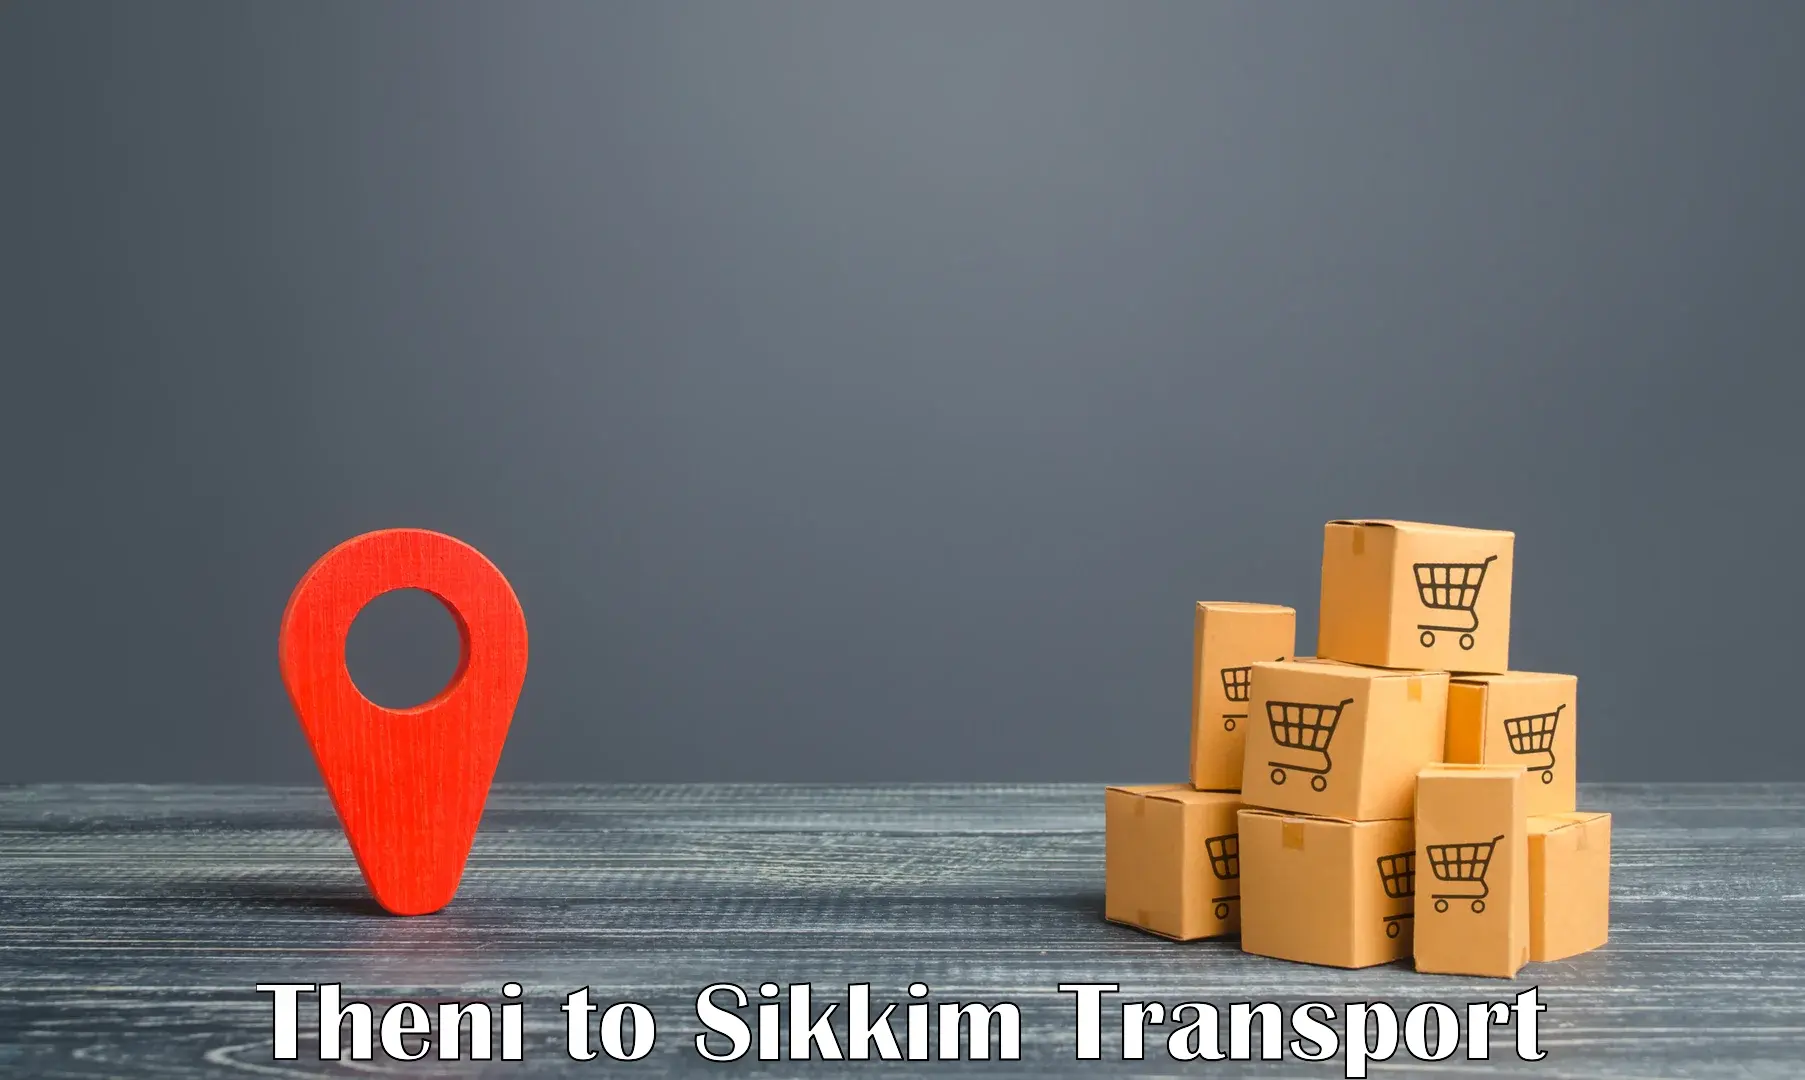 Daily transport service Theni to Sikkim